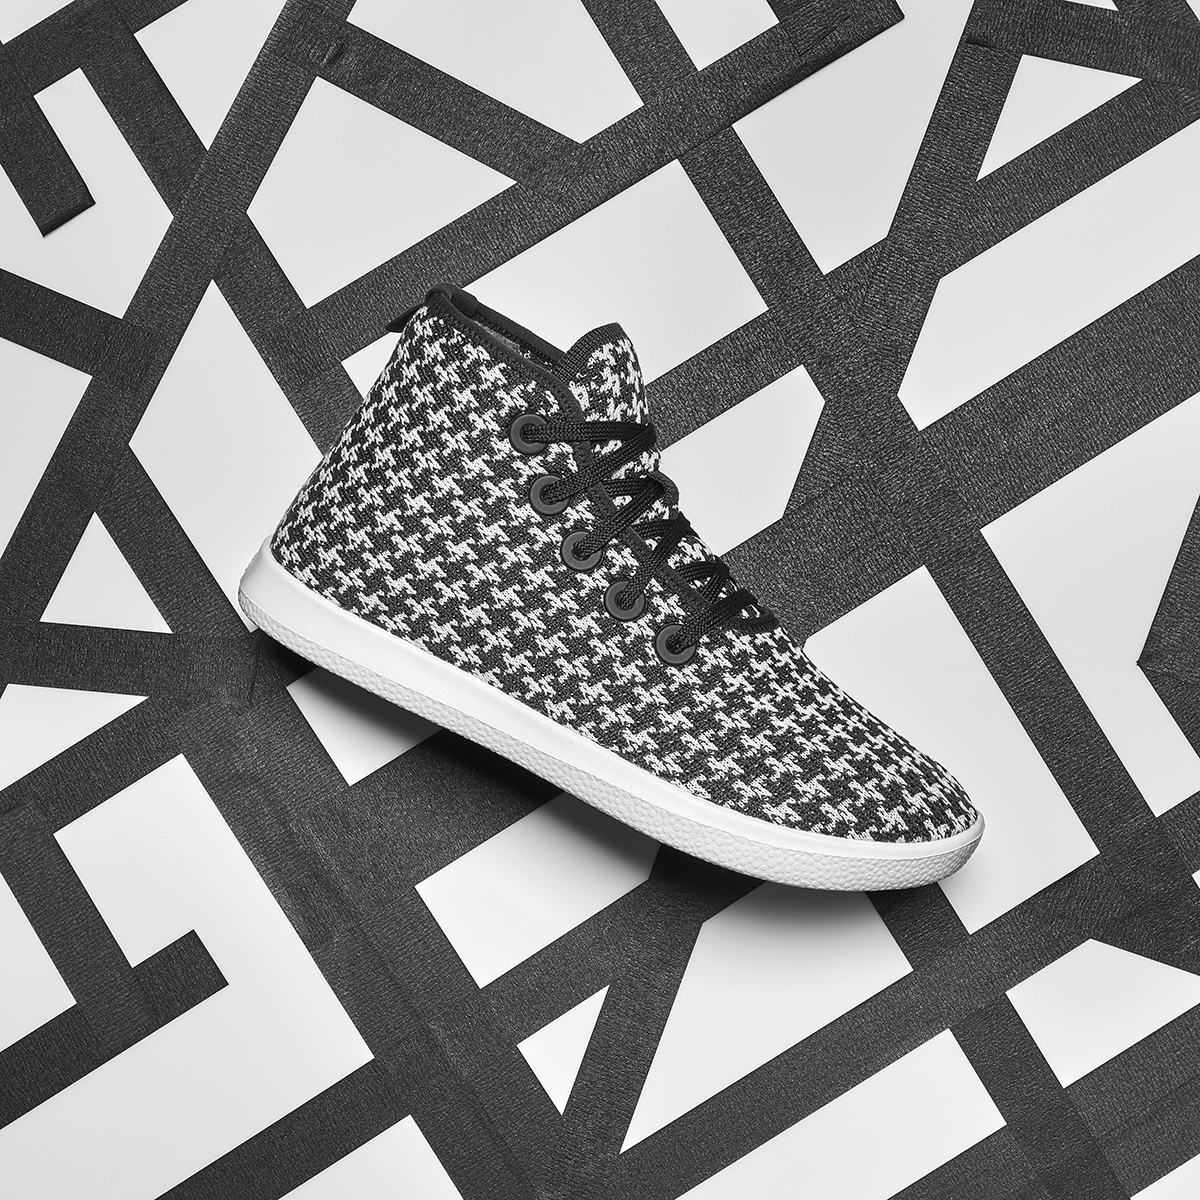 Allbirds Just Launched Its First Ever 